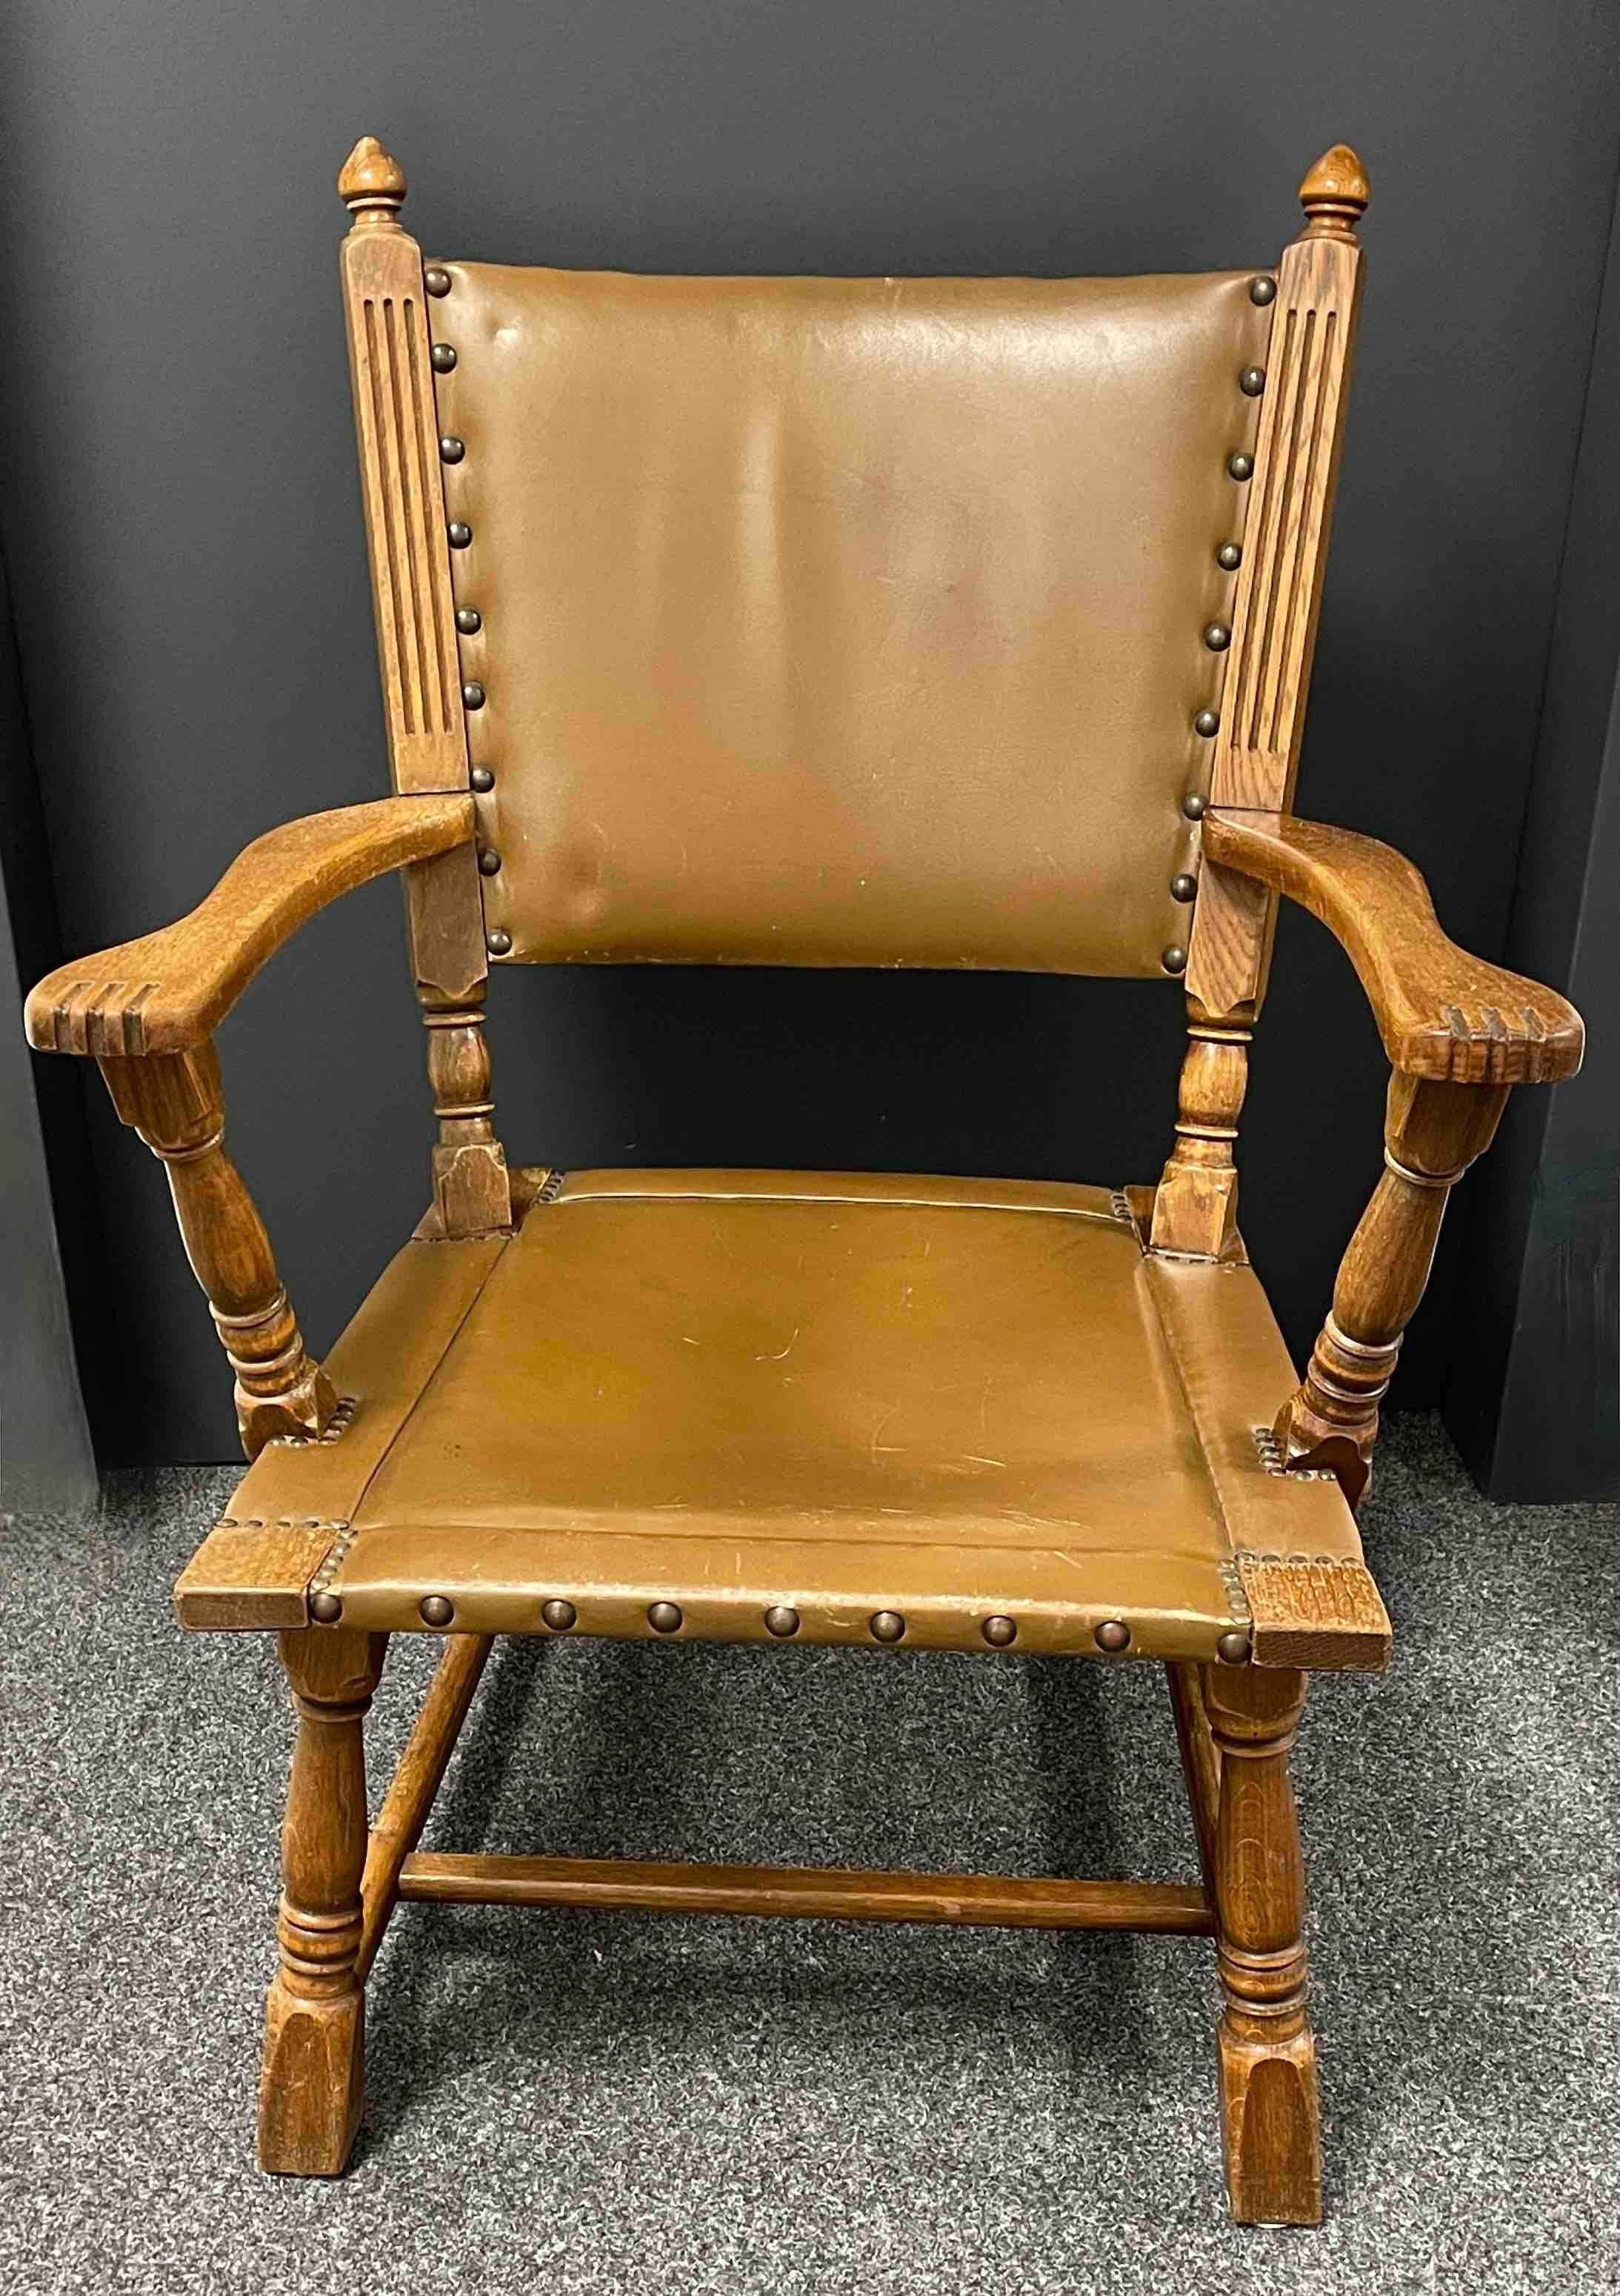 beautiful lounge arm chair made of wood and leather with nailhead details. We think this example is from the 1910s, good condition. Minor patina and scratches on the leather, gives this pieces a classy statement.